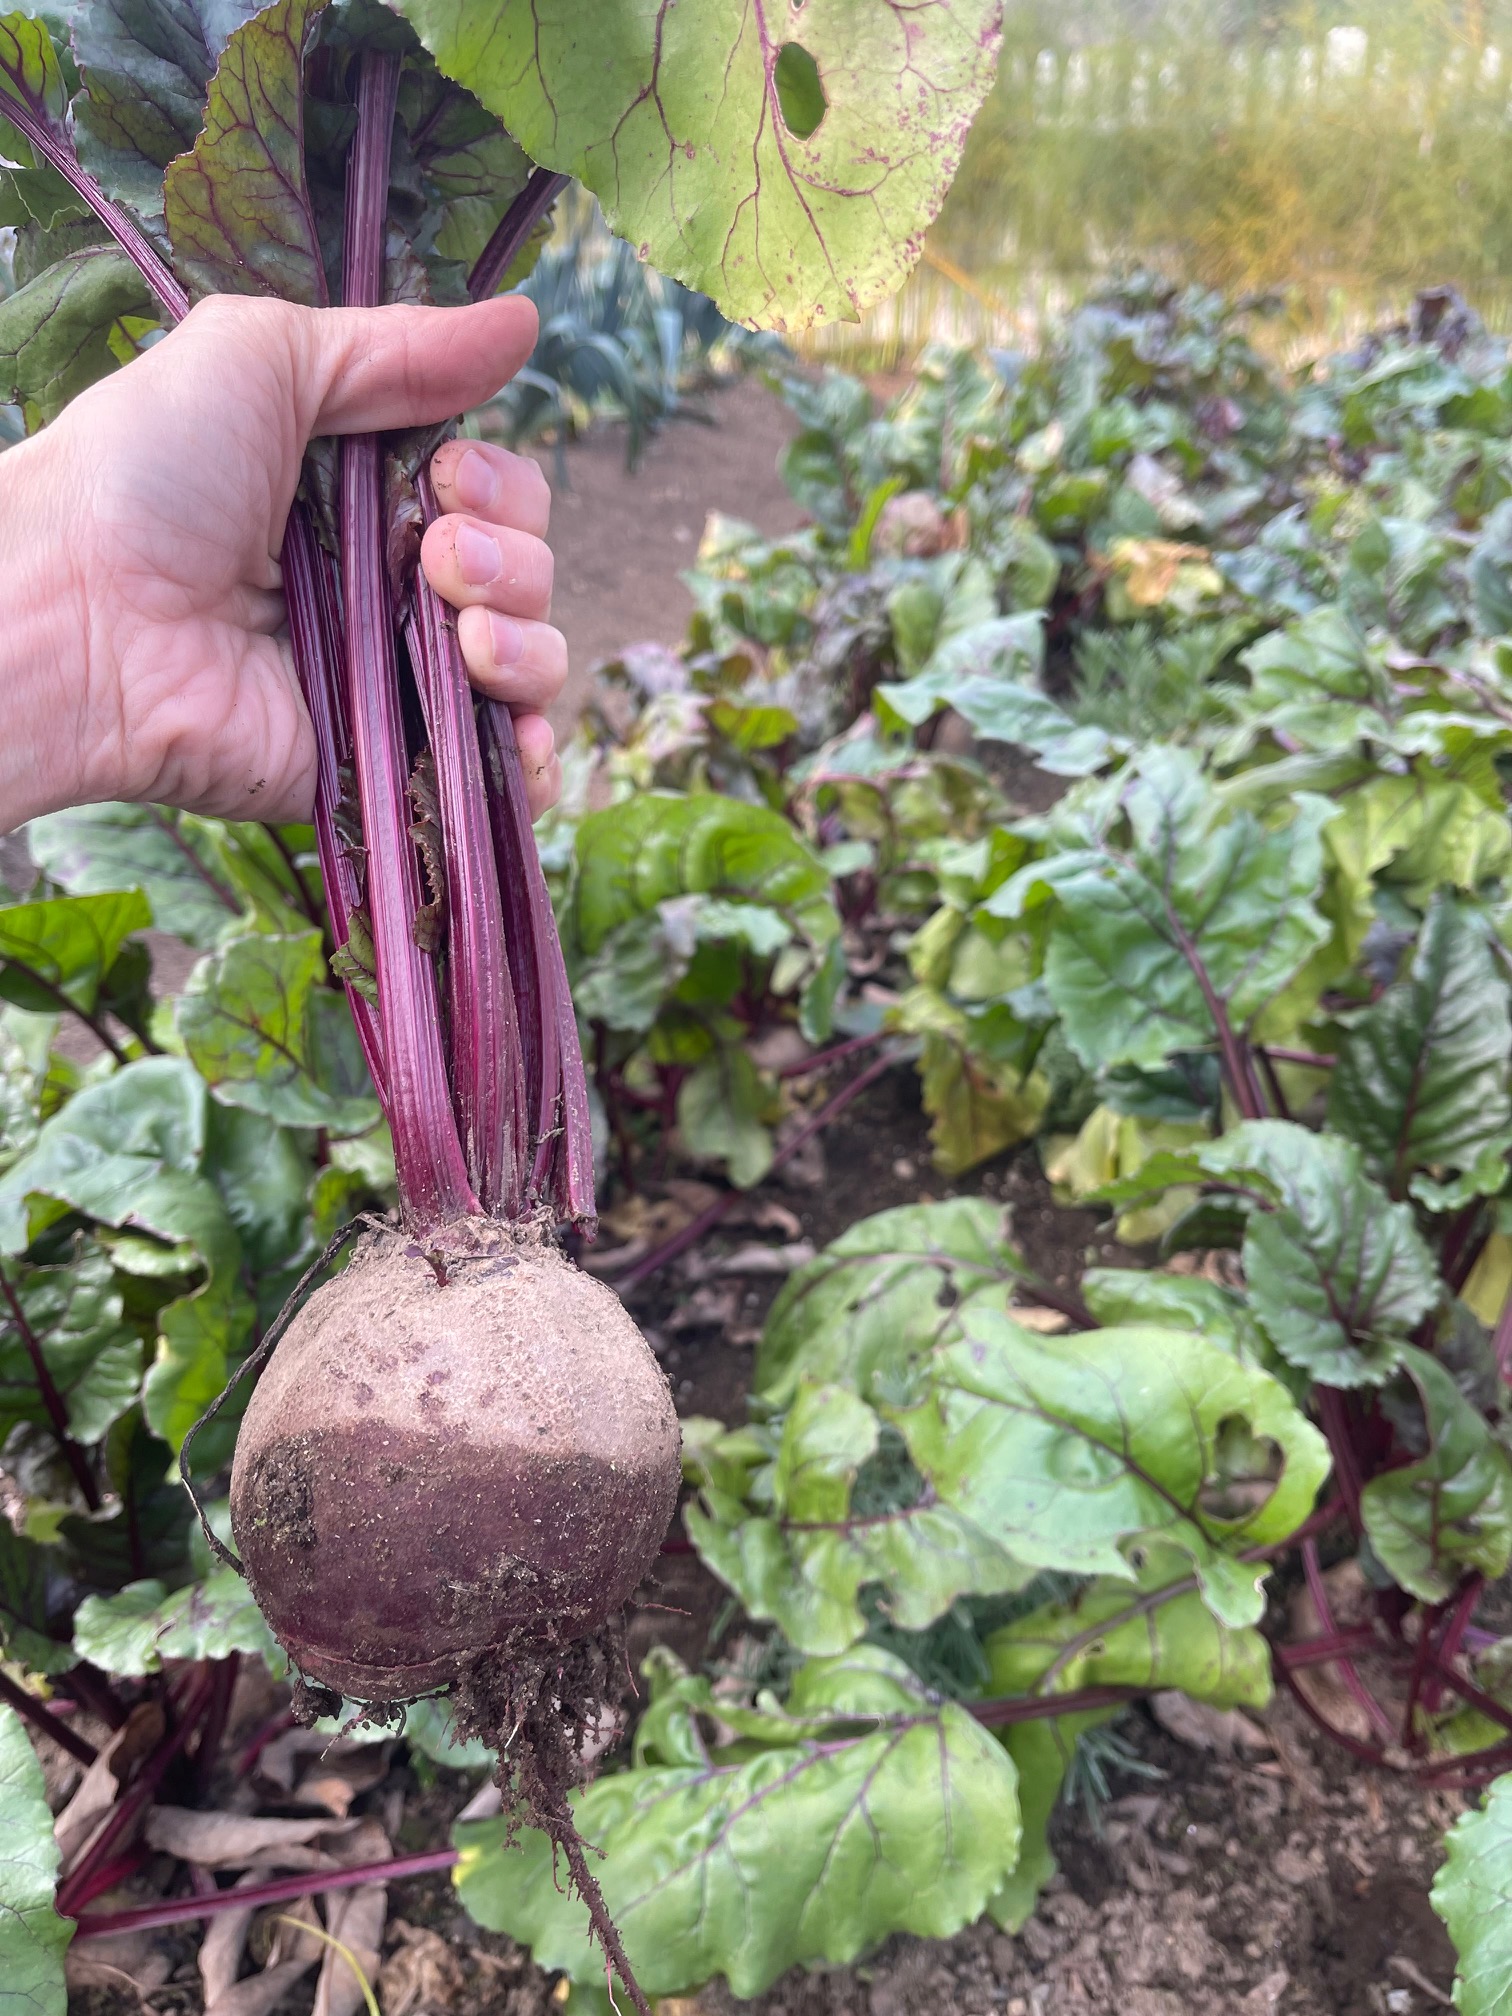 How to Grow Beets {Start to Finish}